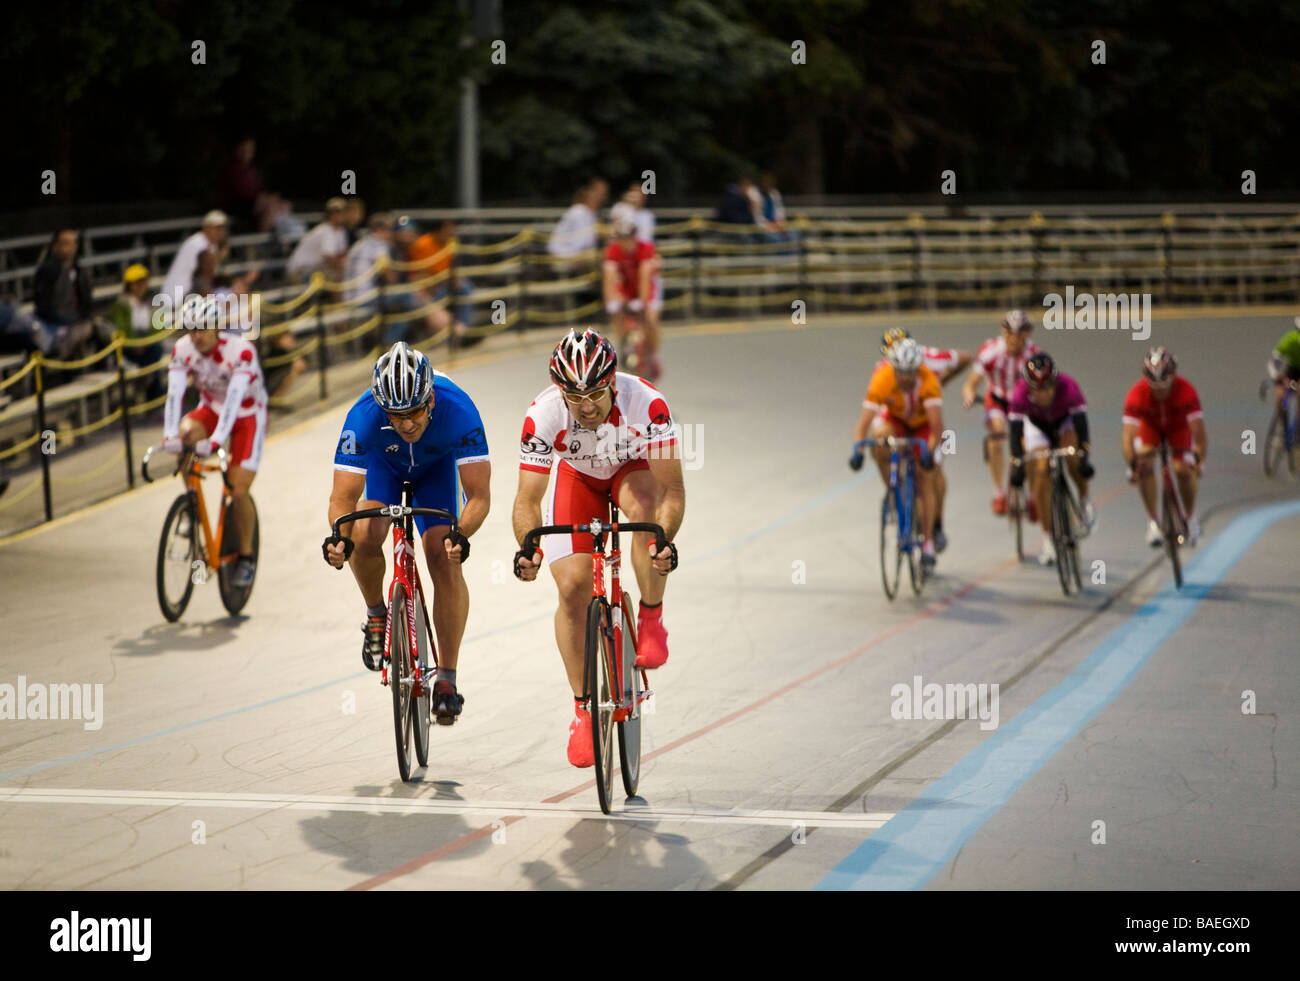 ILLINOIS Northbrook Racers cross lap line during bicycle race at velodrome track Stock Photo